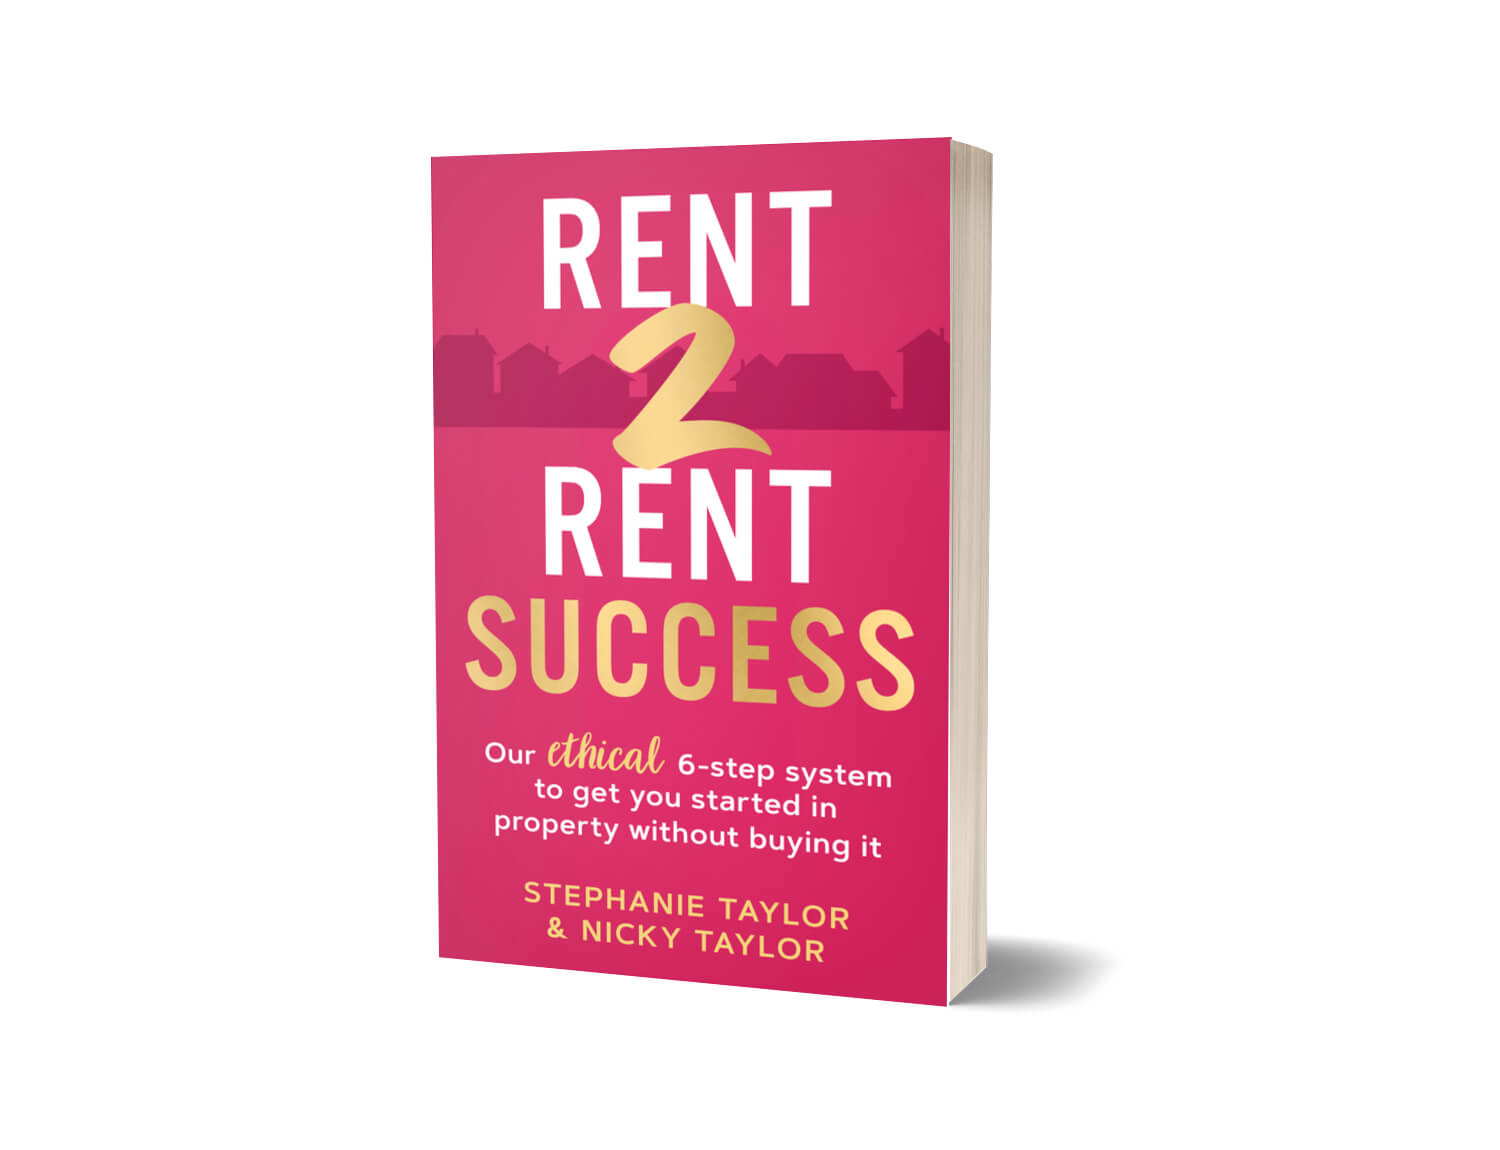 Picture of front cover of the rent 2 rent success book